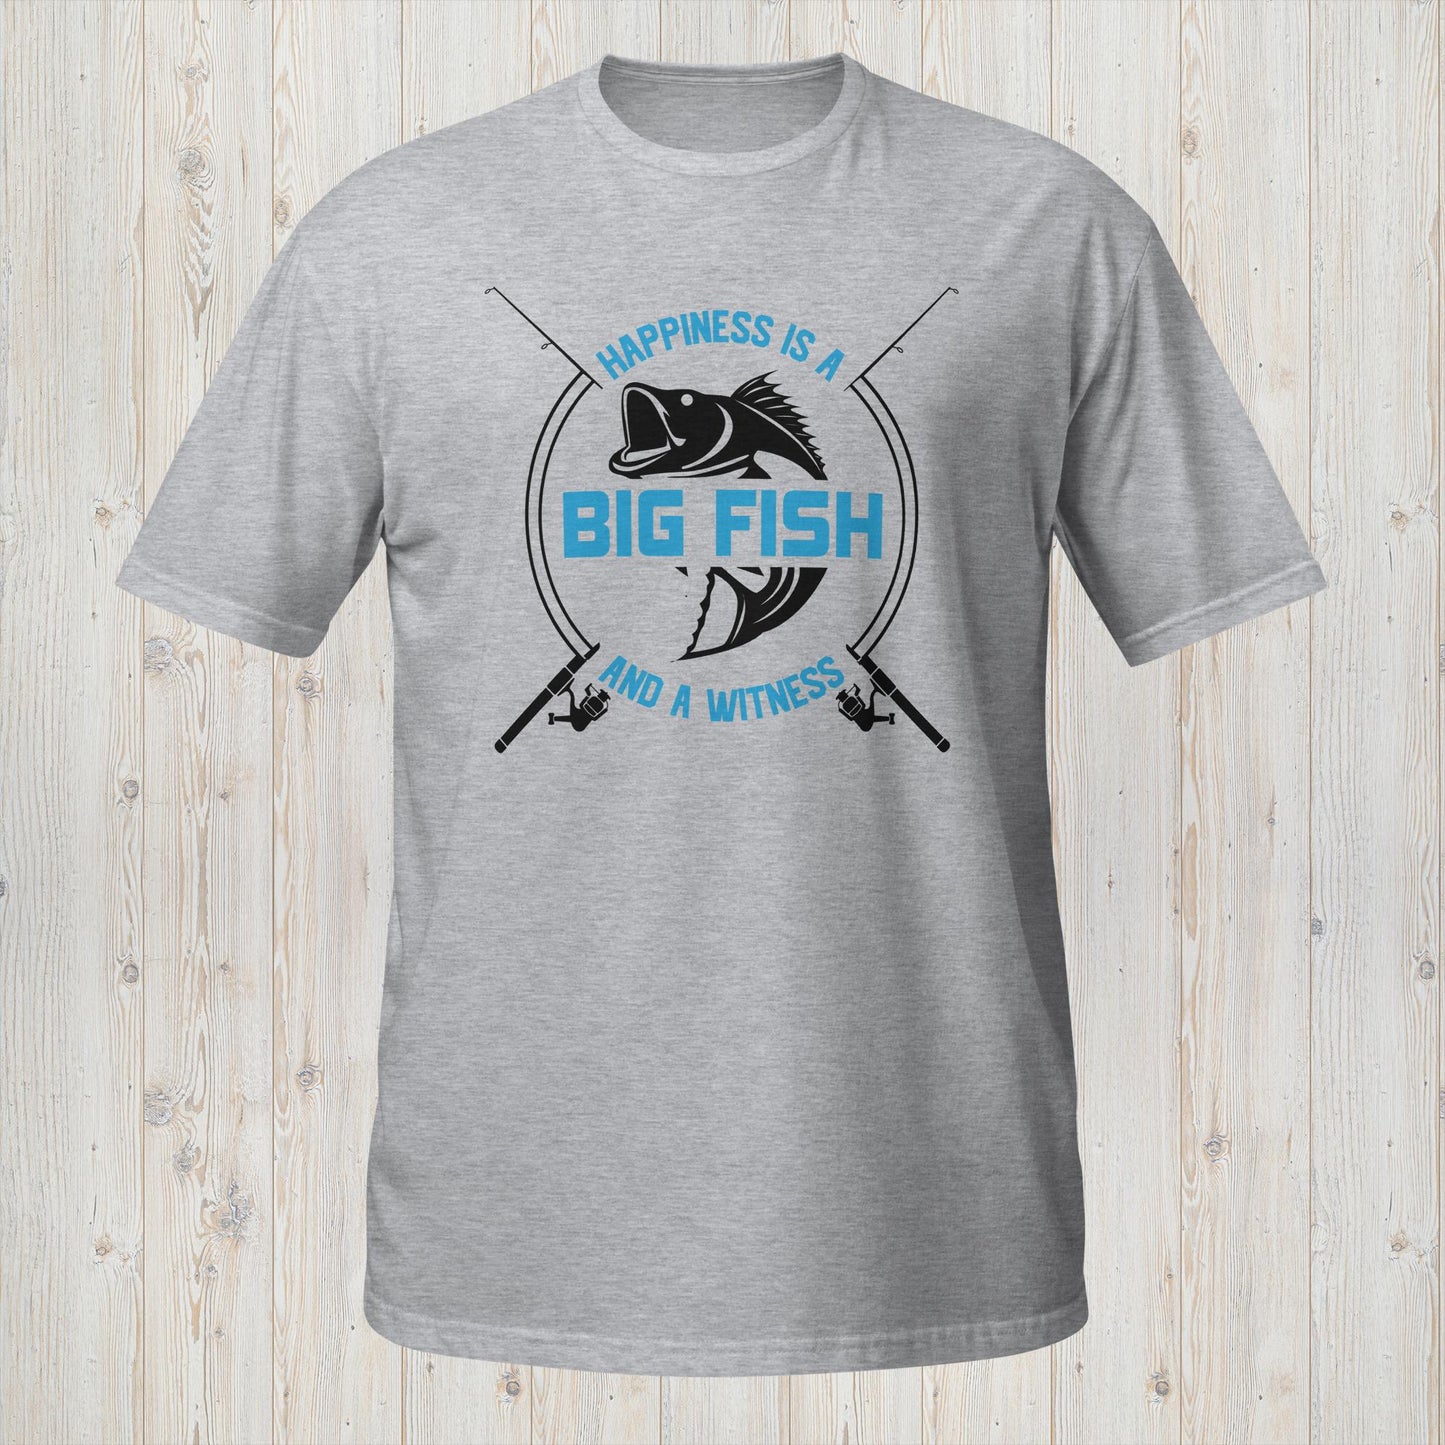 Happiness is a Big Fish and a Witness Tee - Fishing Enthusiast T-Shirt